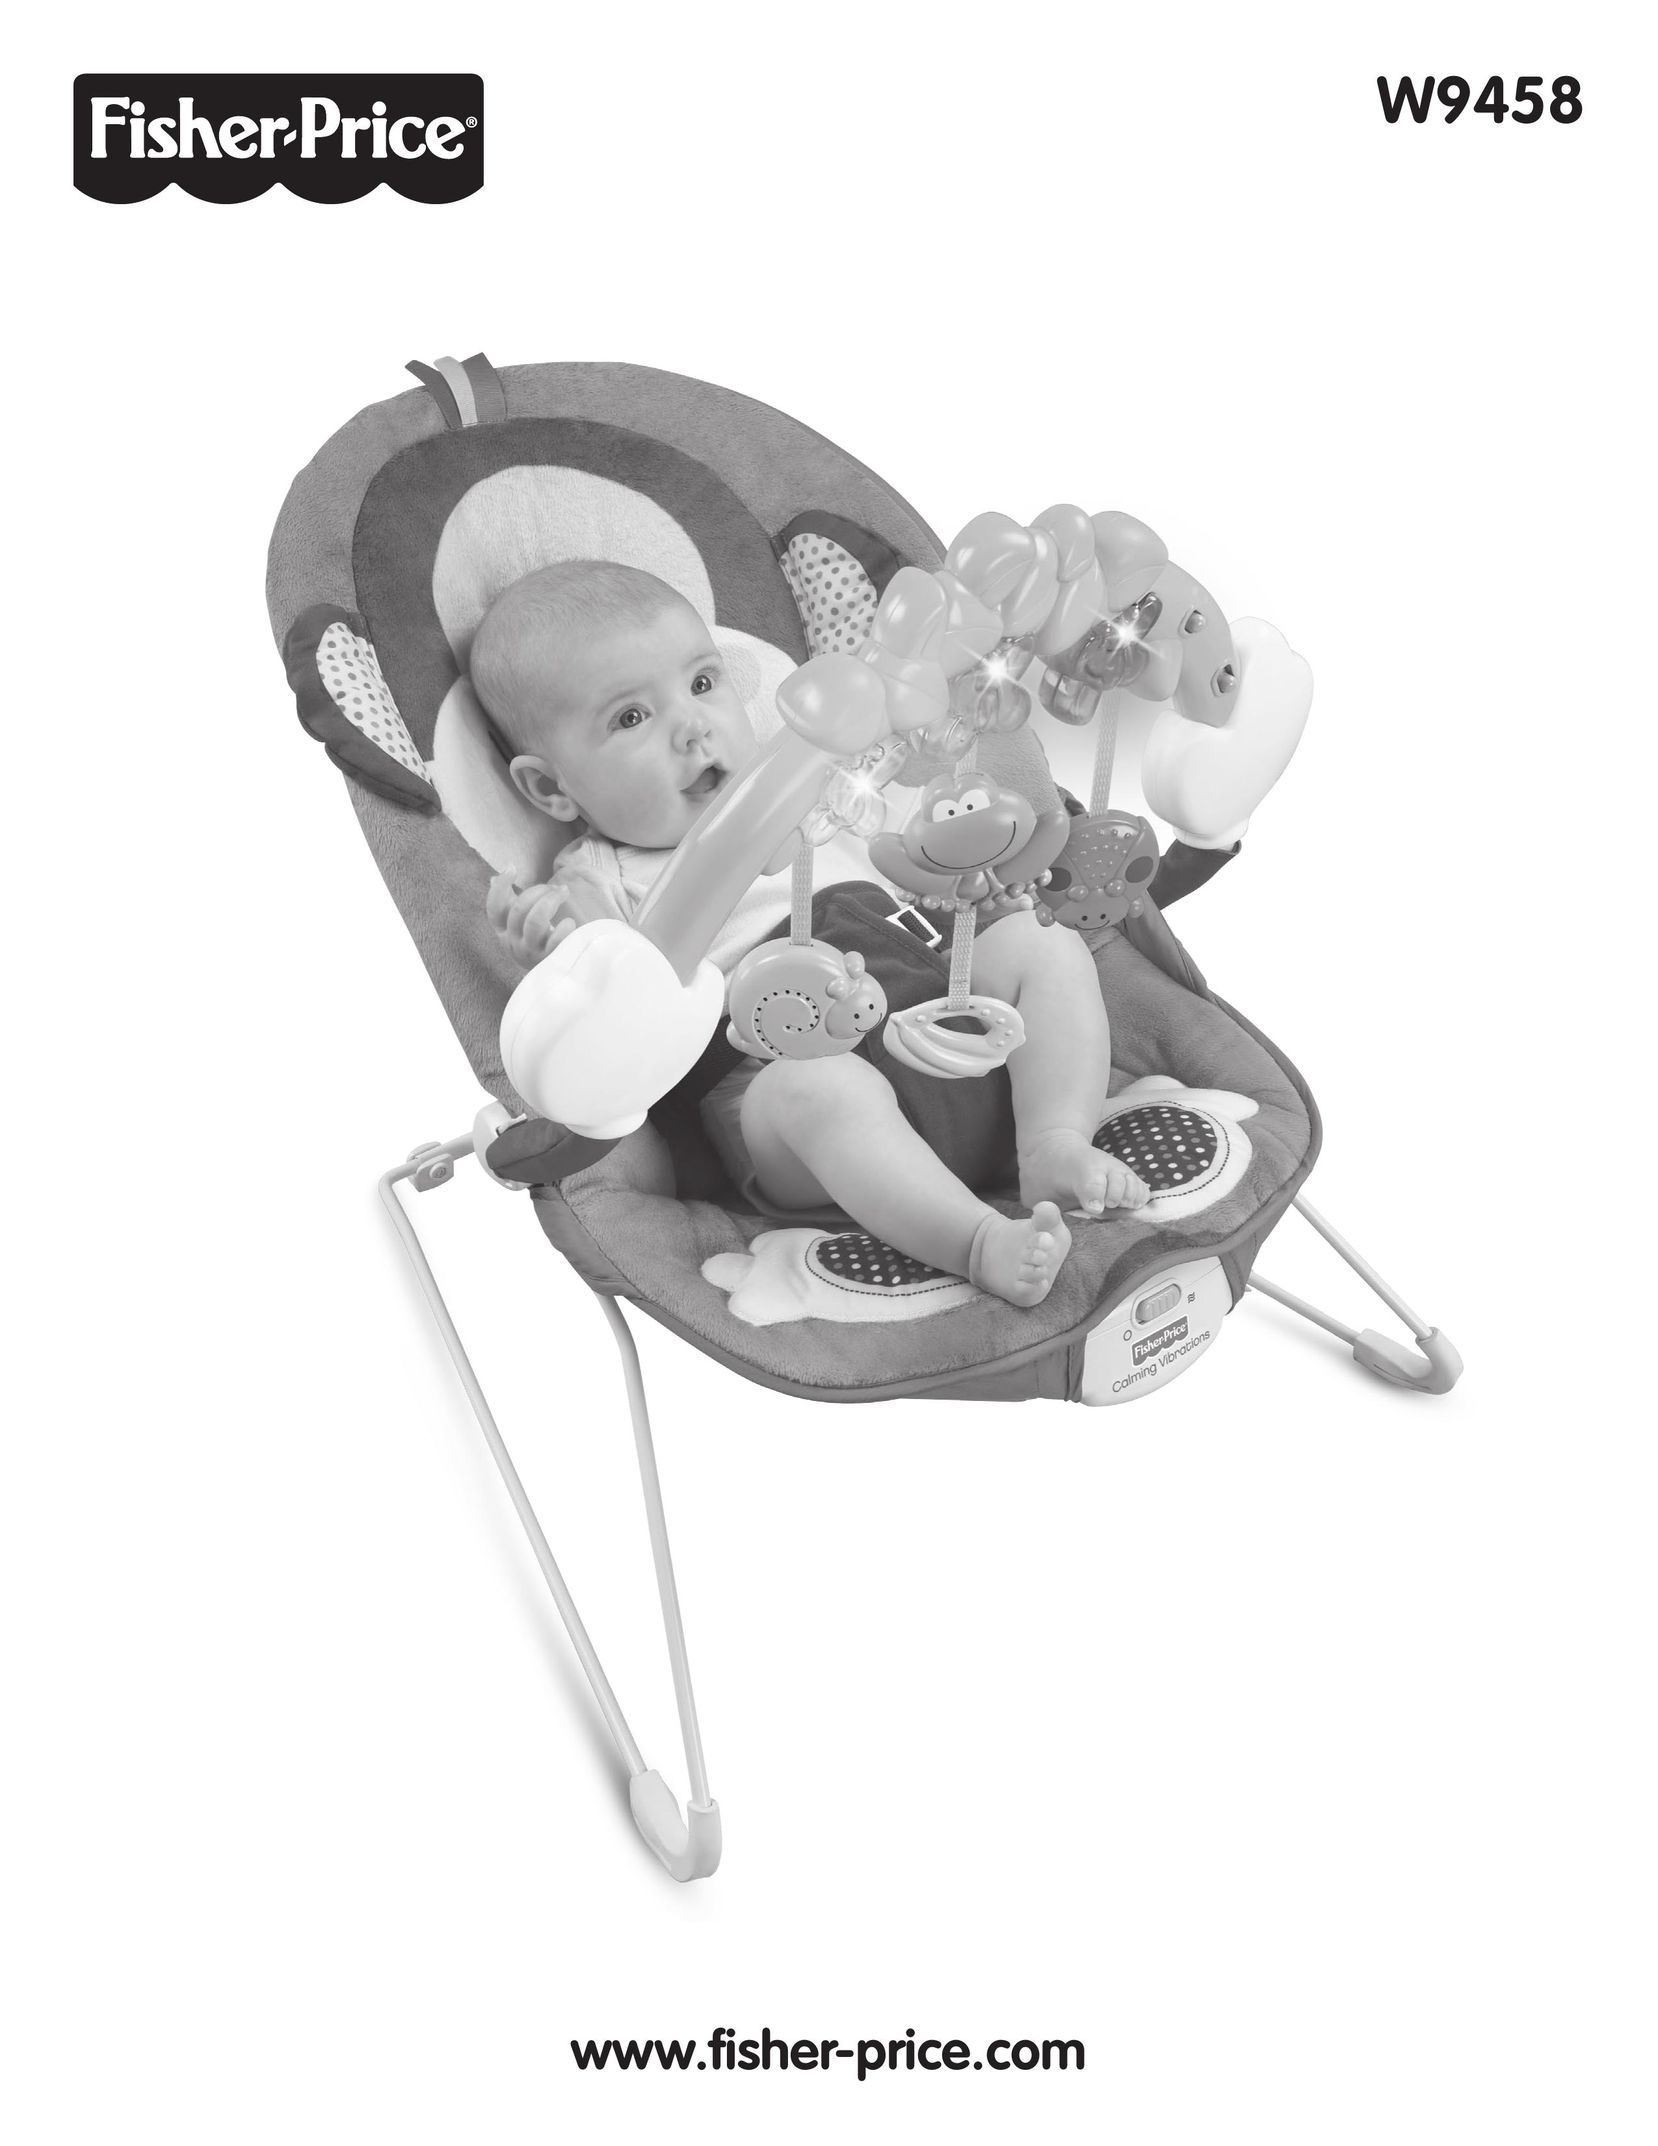 Fisher-Price W9458 Bouncy Seat User Manual